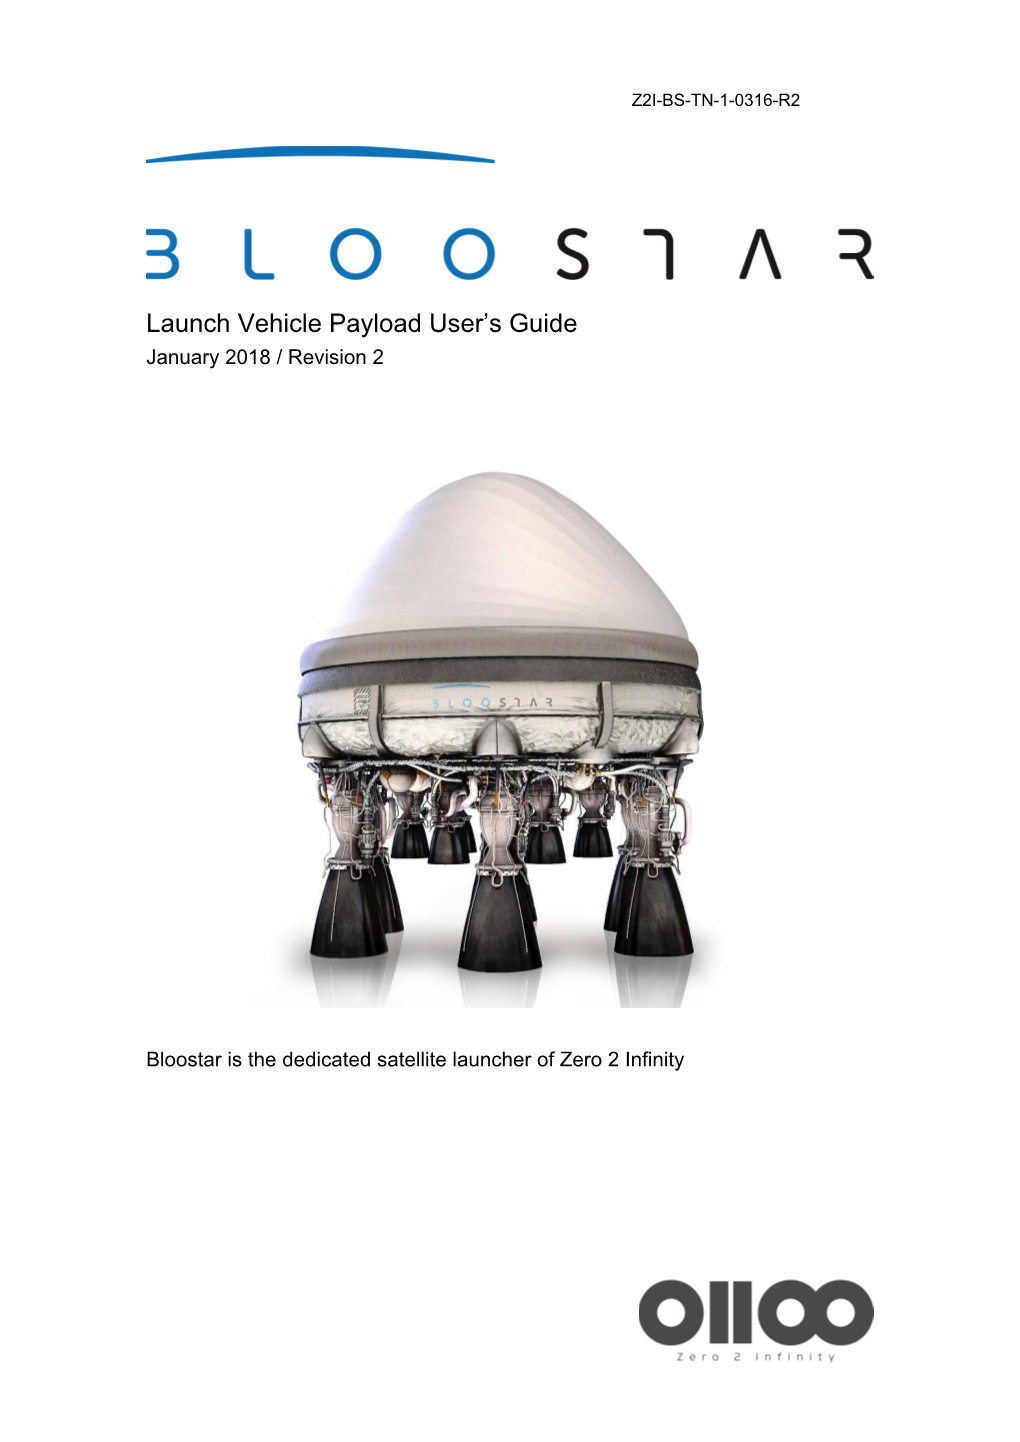 Bloostar Launch Vehicle Payload User's Guide